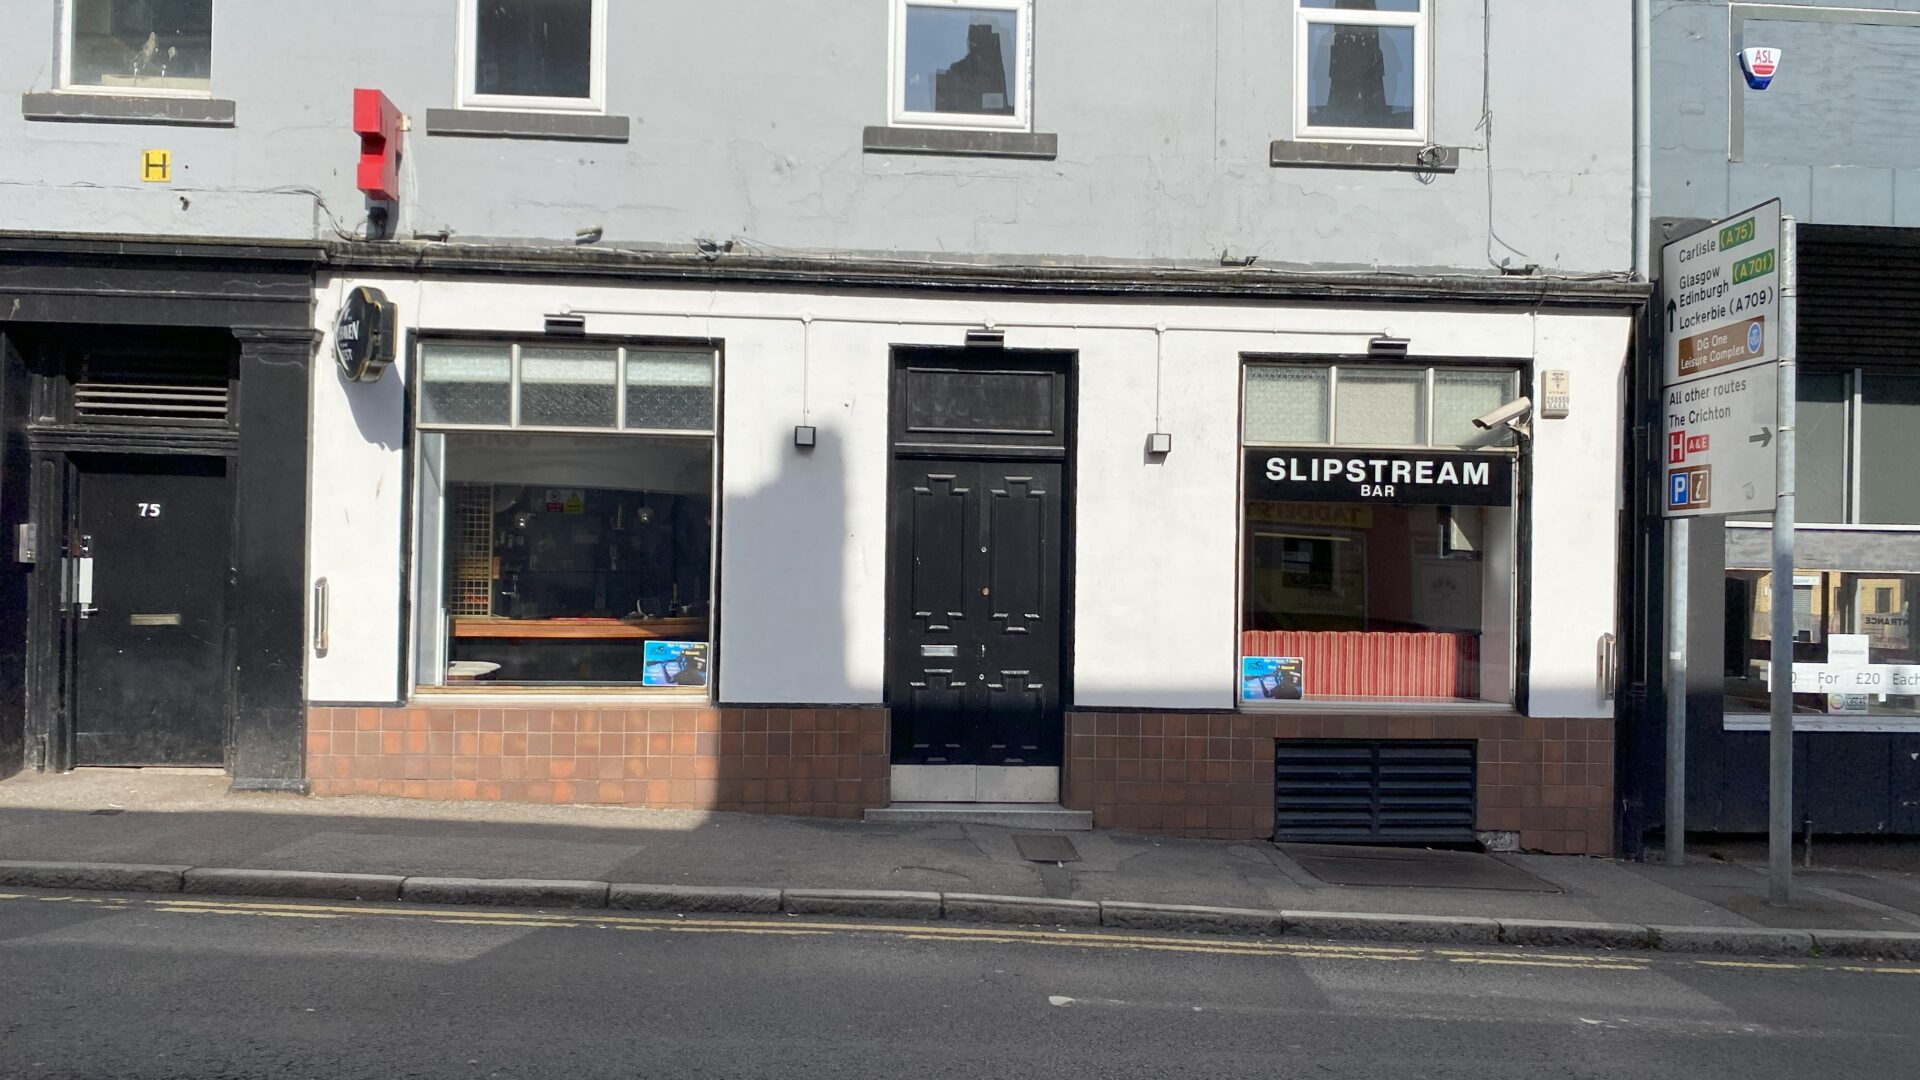 Shepherd markets Slipstream Bar in Dumfries for sale after 35 years under family ownership